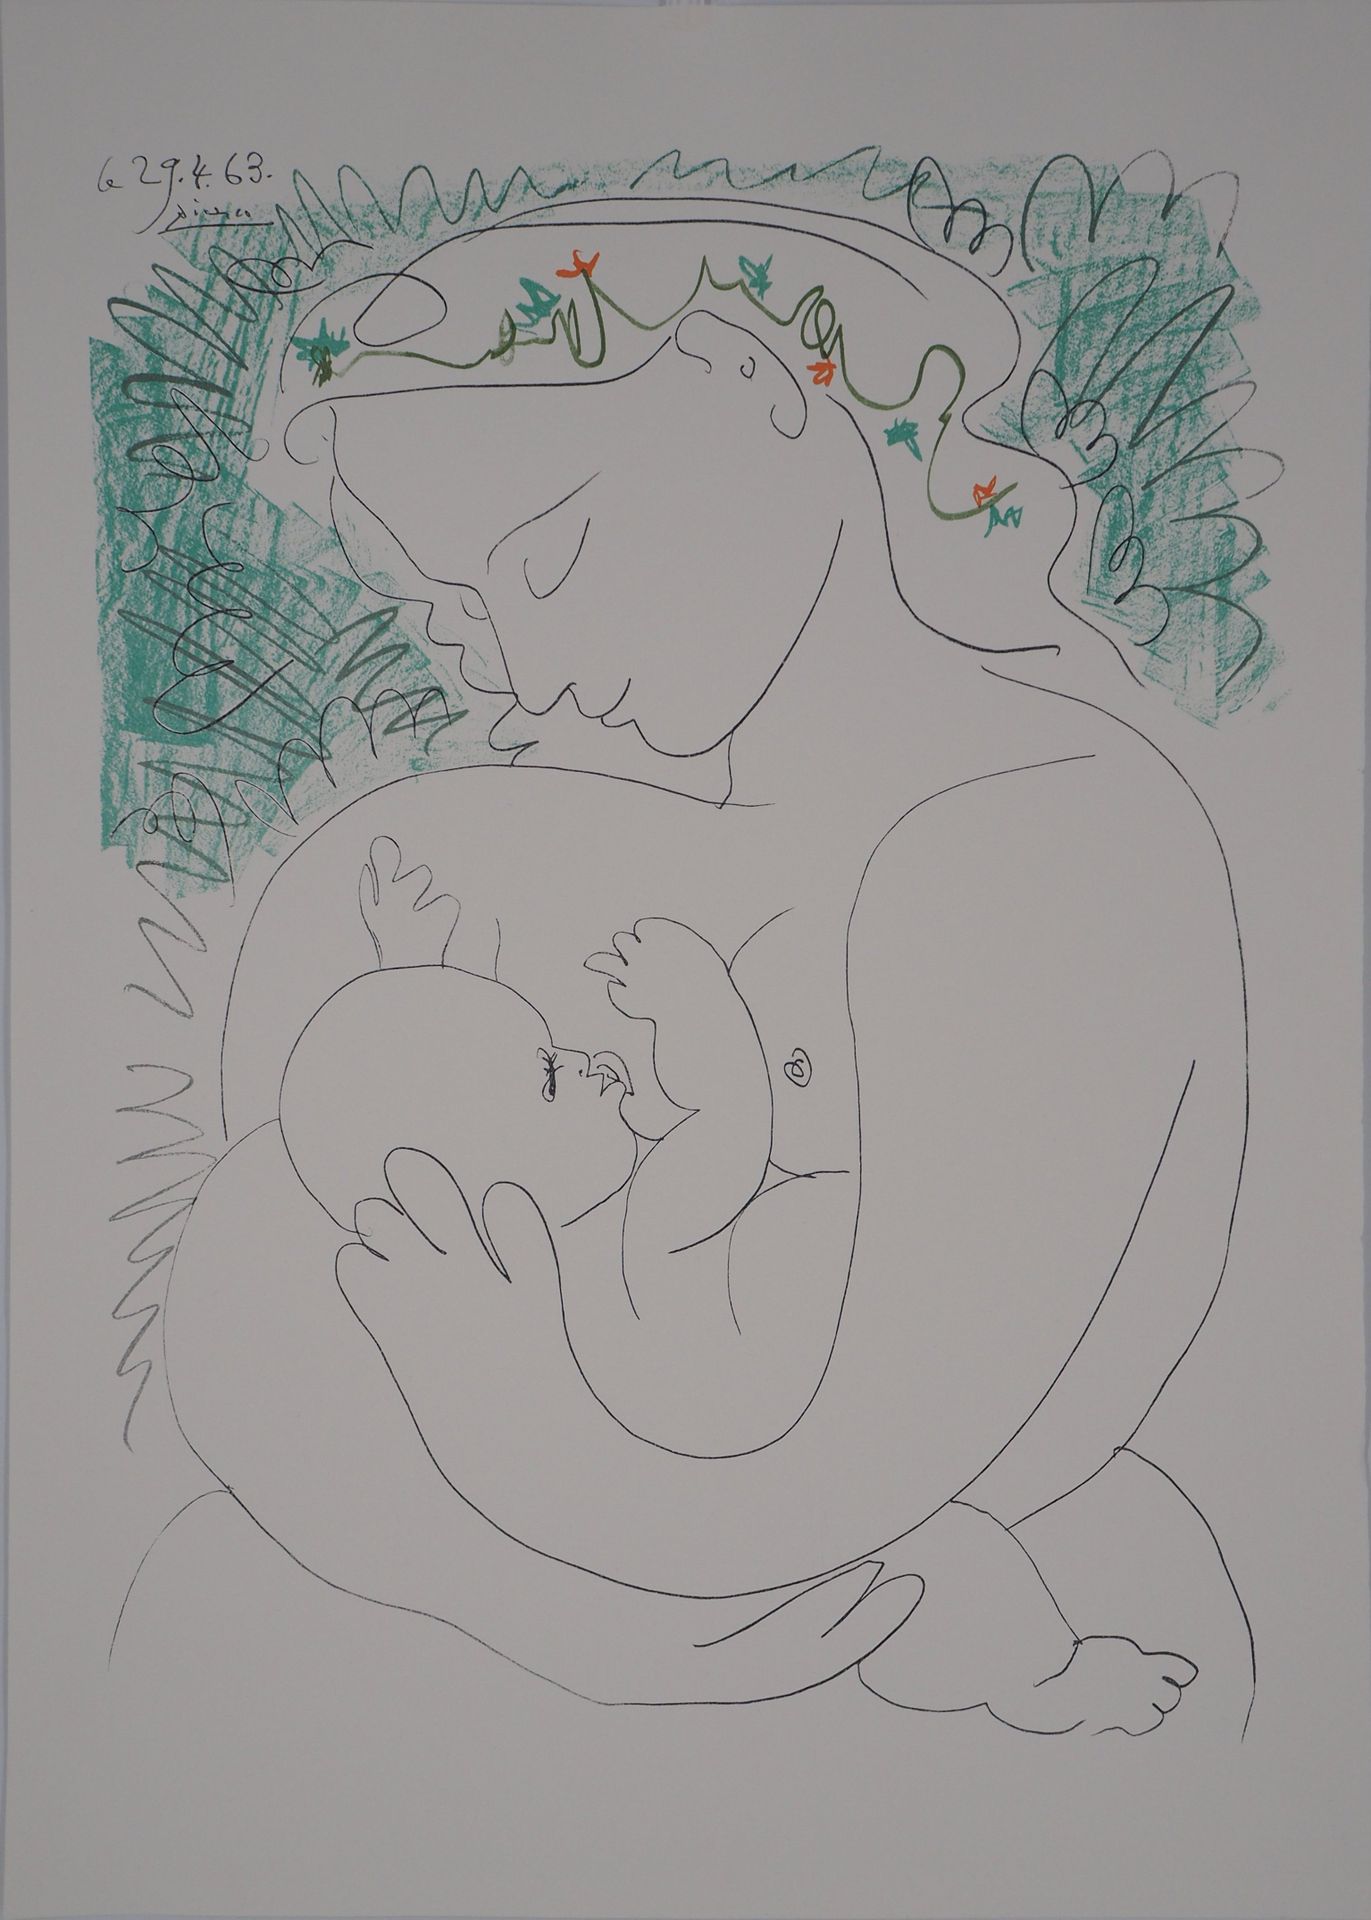 Pablo PICASSO Pablo PICASSO (nach)

Umstandsmode, großes Modell

Farblithographi&hellip;